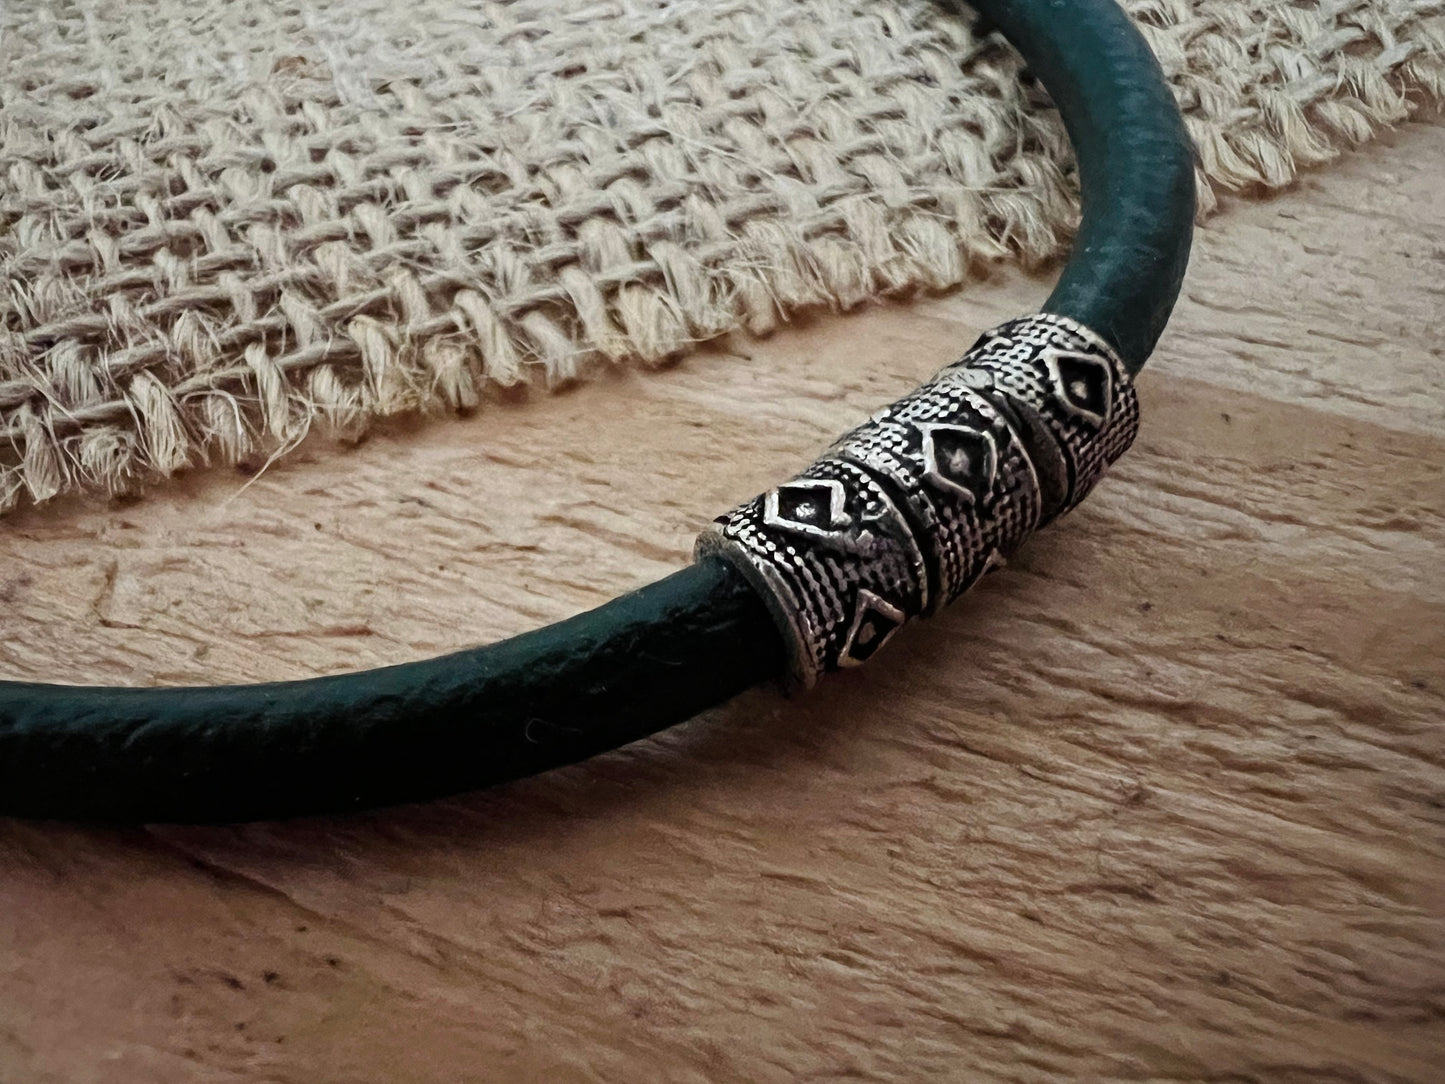 Handmade & Fair Trade Forest Green Cord Bracelet Uni Sex With Silver Beads Surfer Bohemian Style 